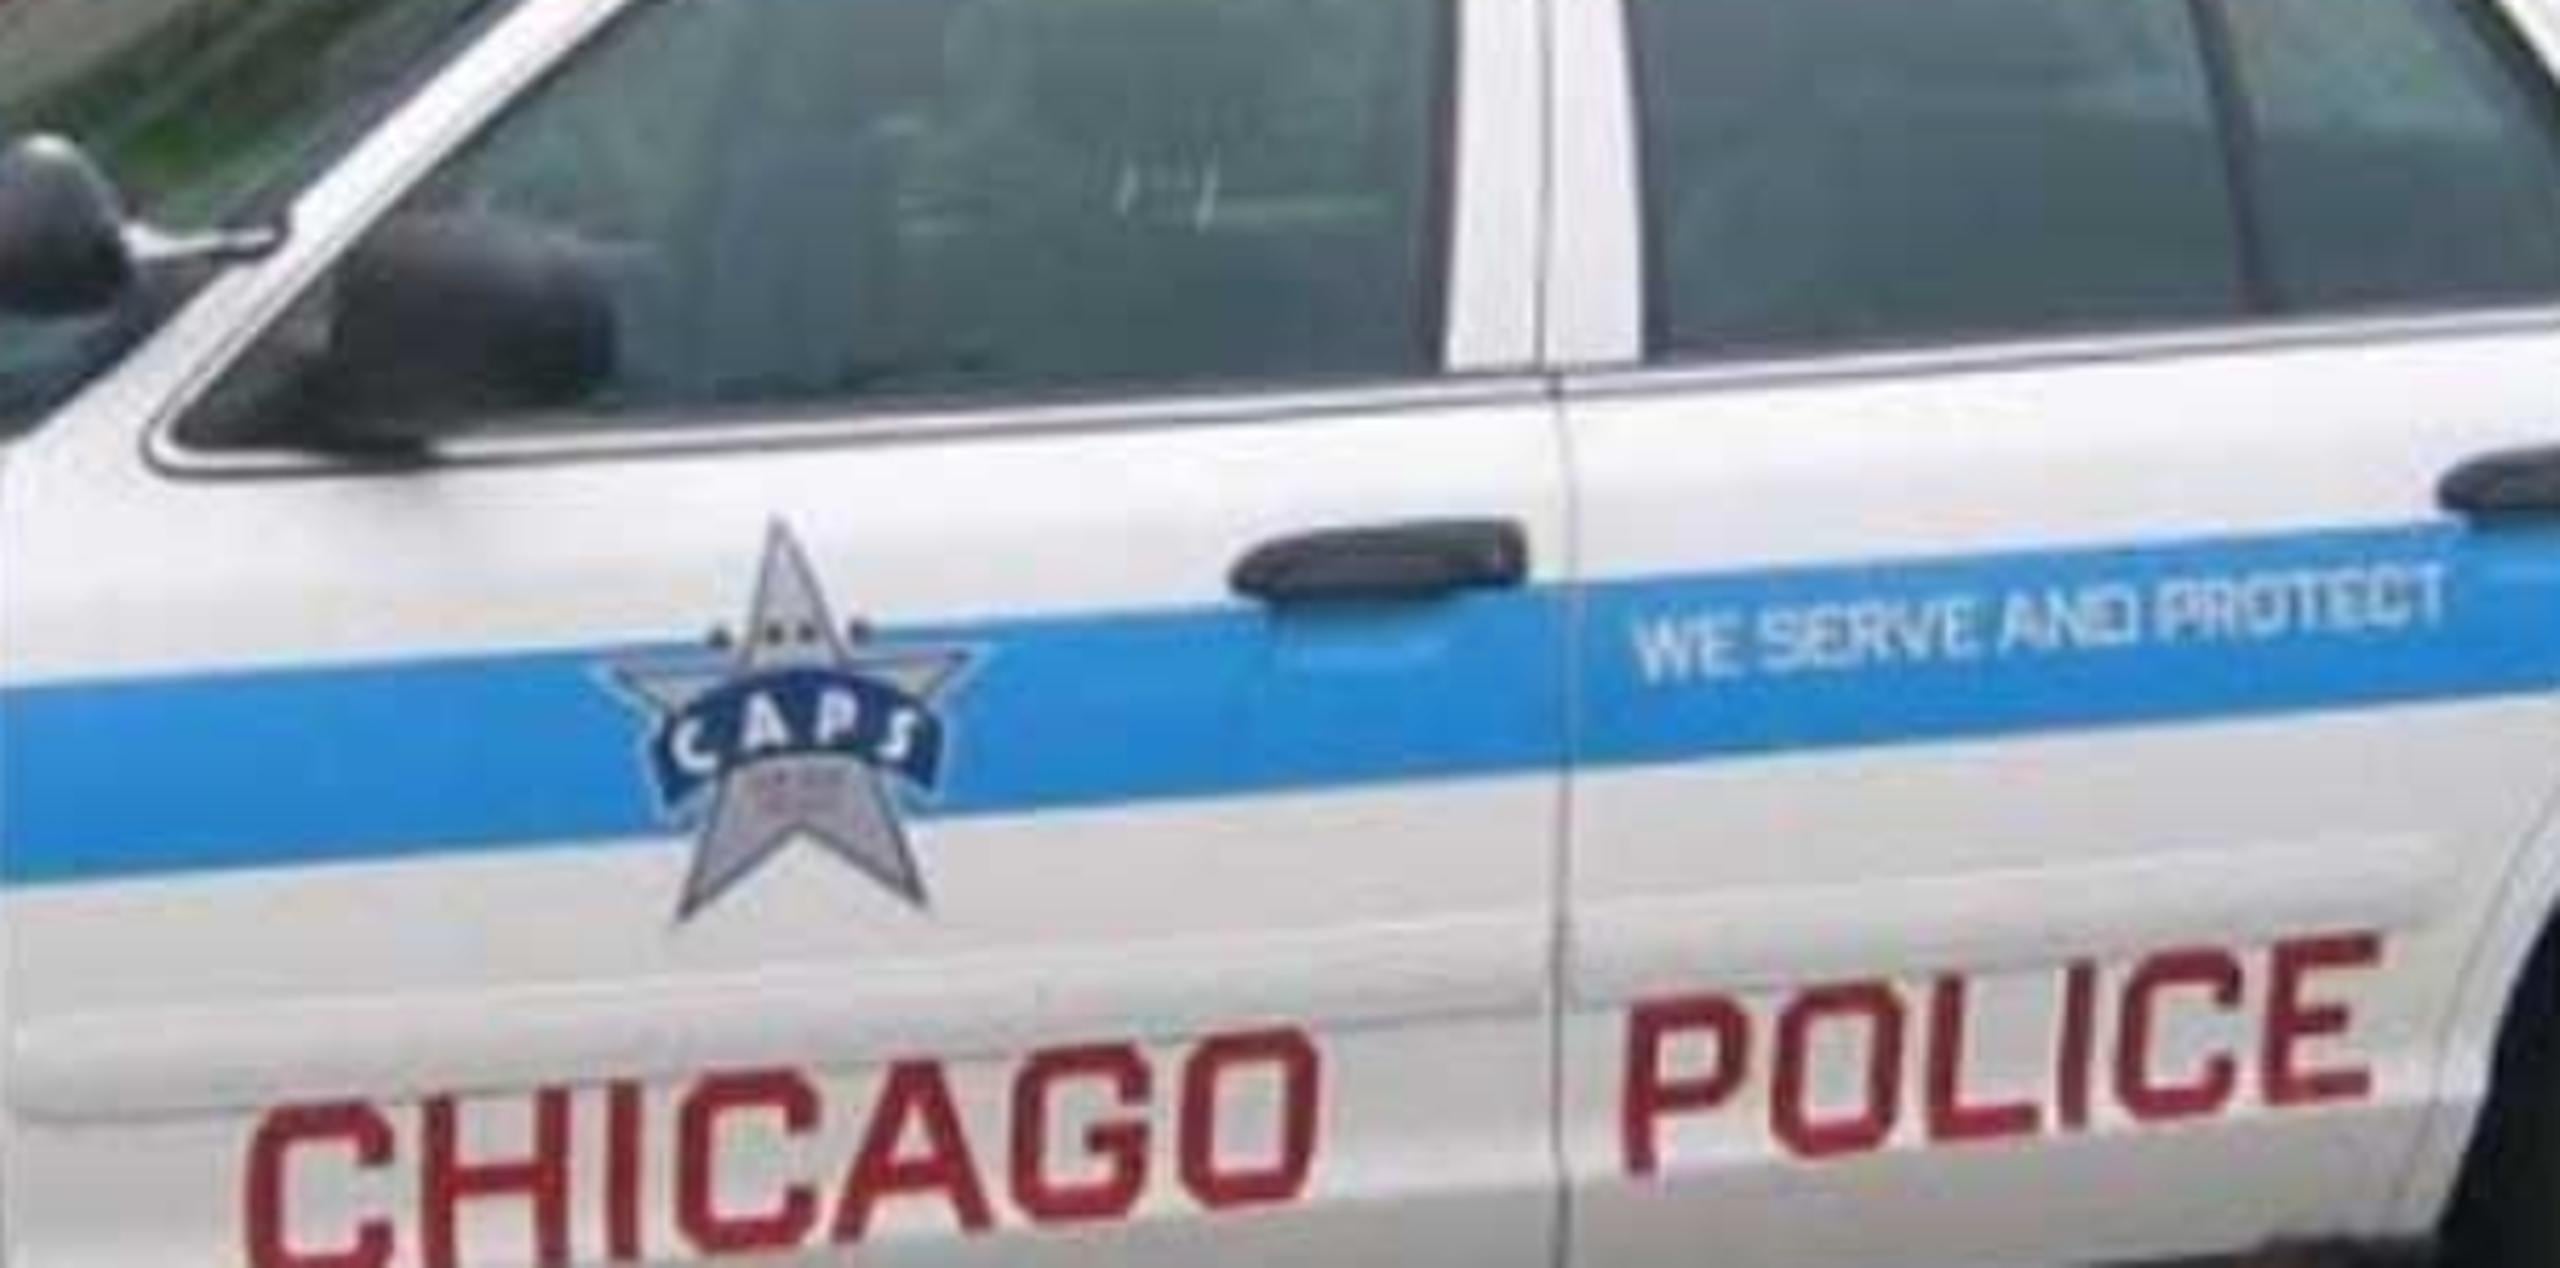 (http://home.chicagopolice.org/)